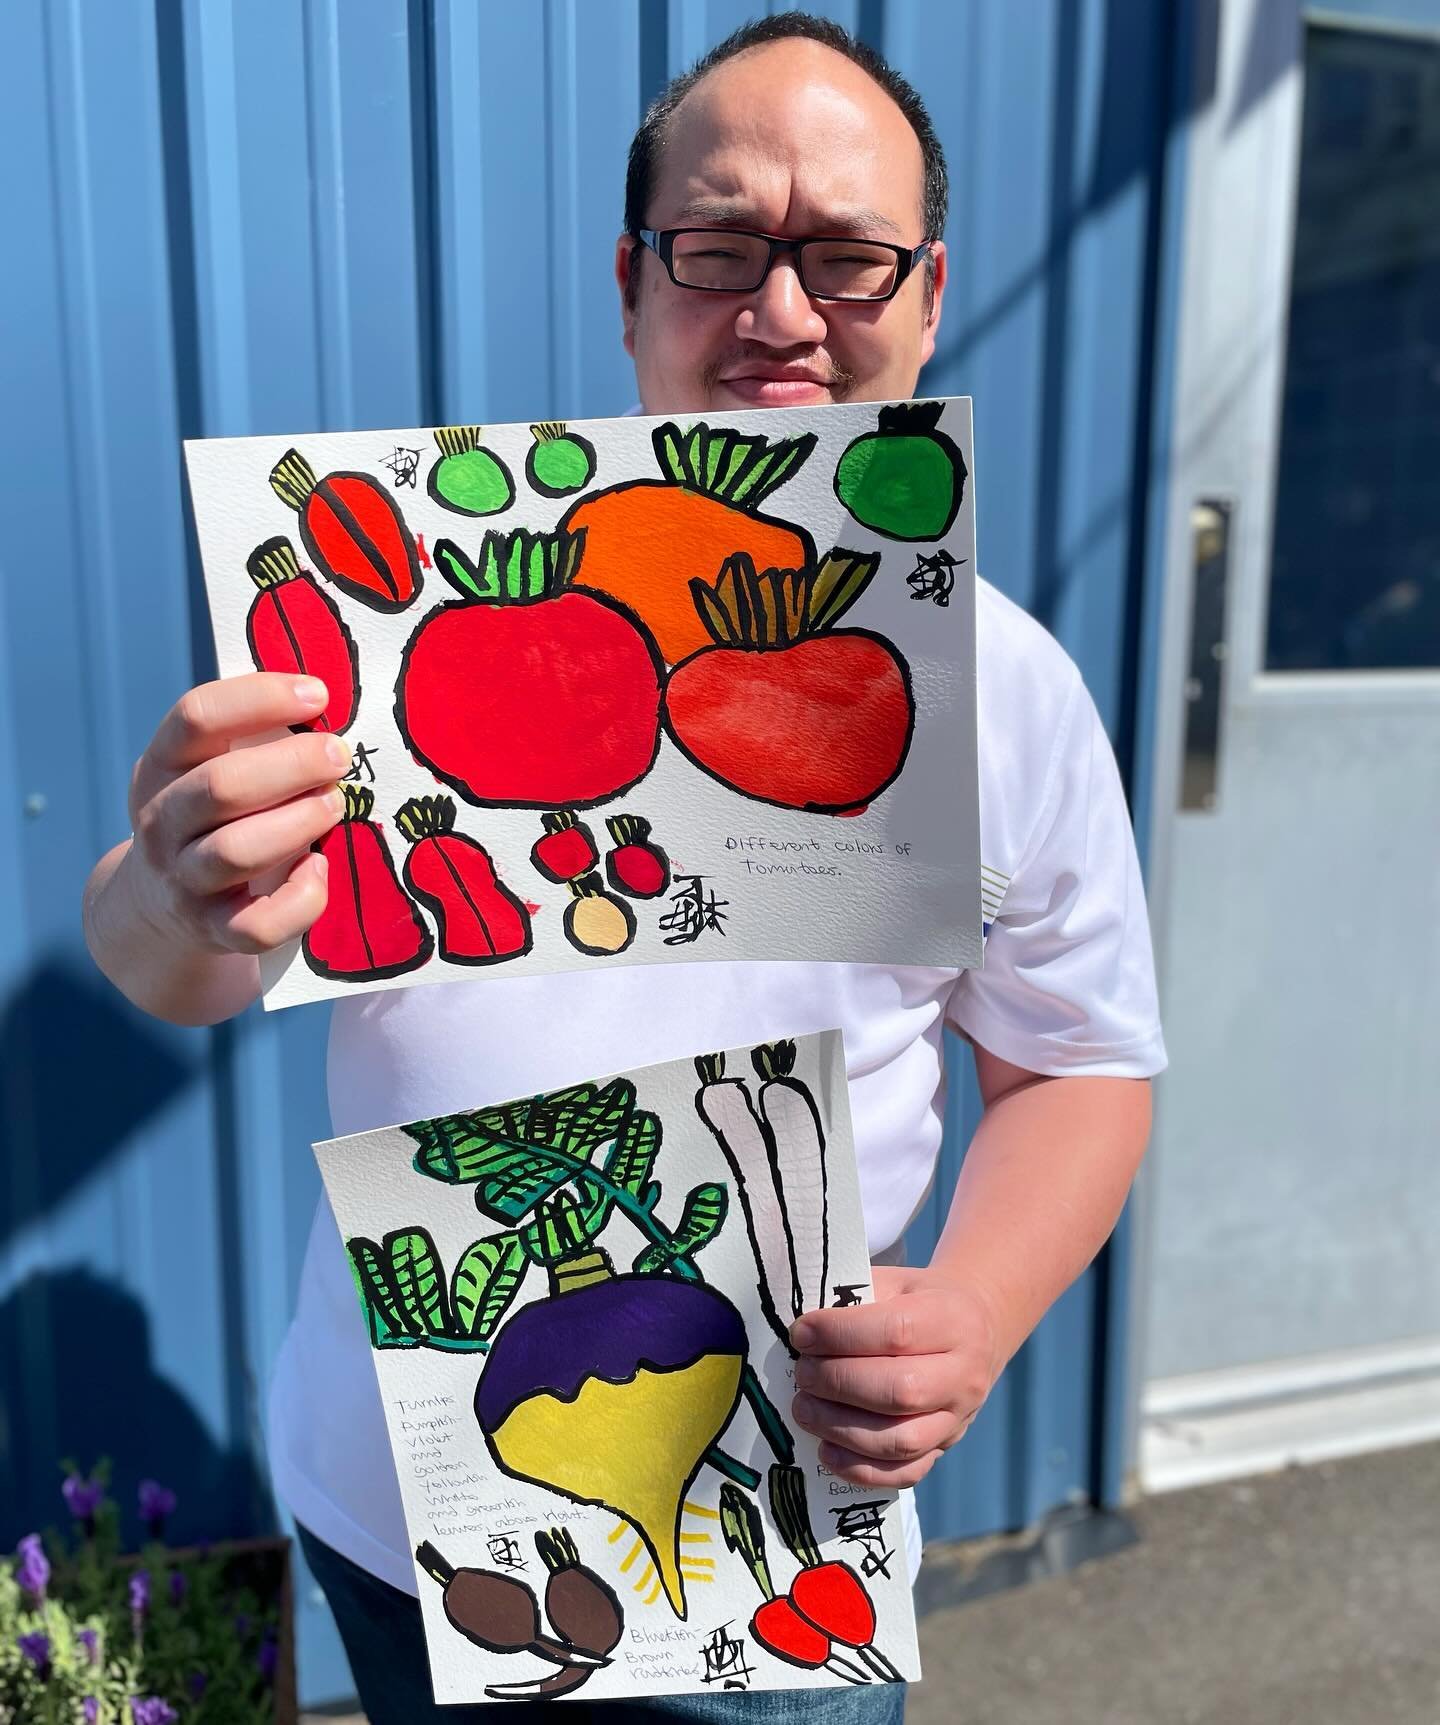 Spring produce by Dan Tran 🌈 At every season change, we look forward to Dan&rsquo;s drawings of seasonal vegetables, fruits and meals along with his recommendations for favorite recipes. 
.
.
.
Image description: Dan stands in front of North Pole St